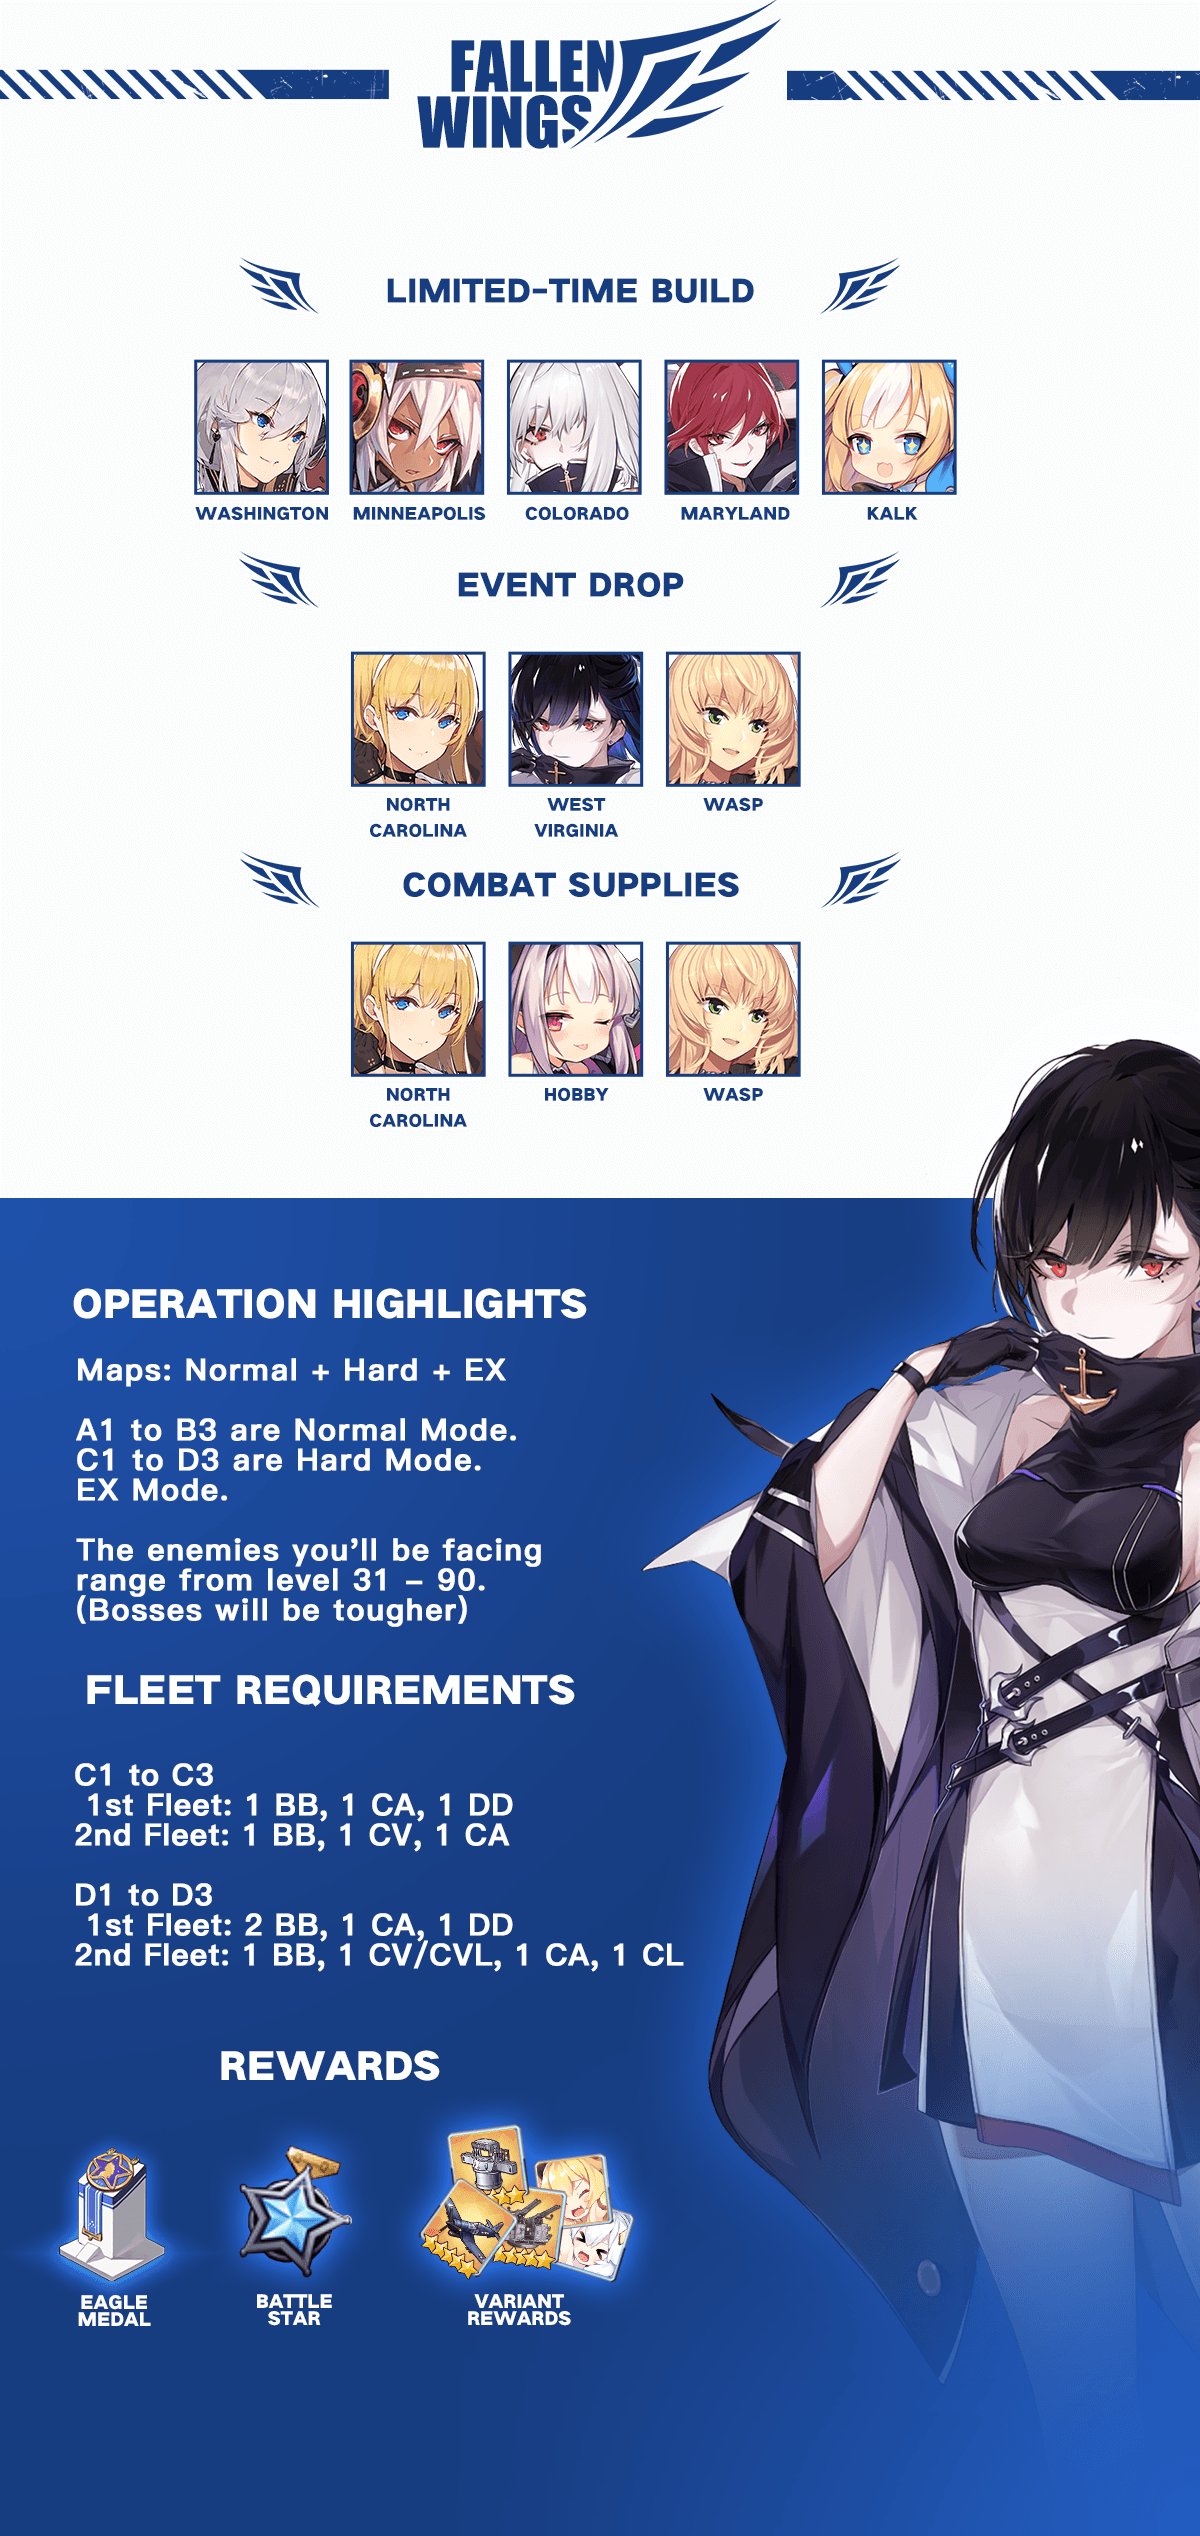 what will be the best gear for them other than the limited event gears :  r/AzurLane